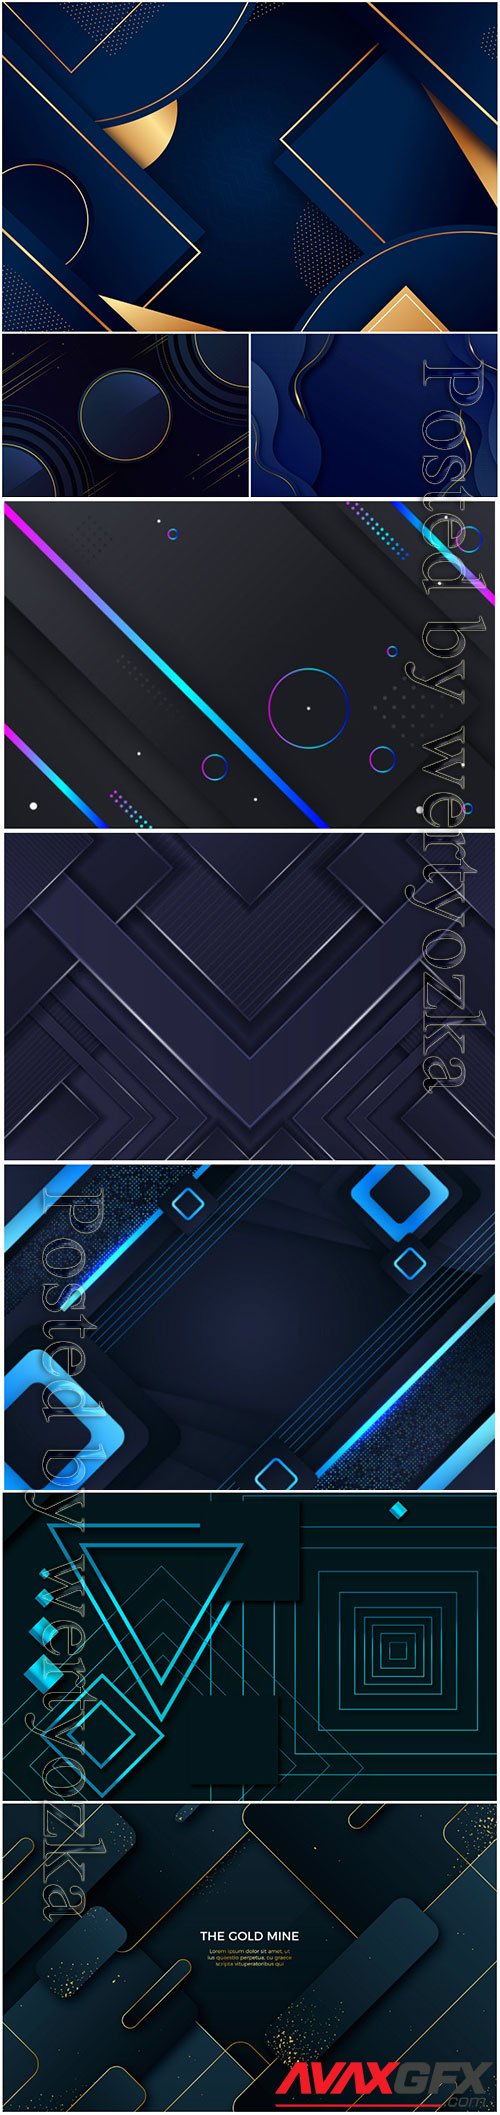 Luxury abstract backgrounds in vector # 4